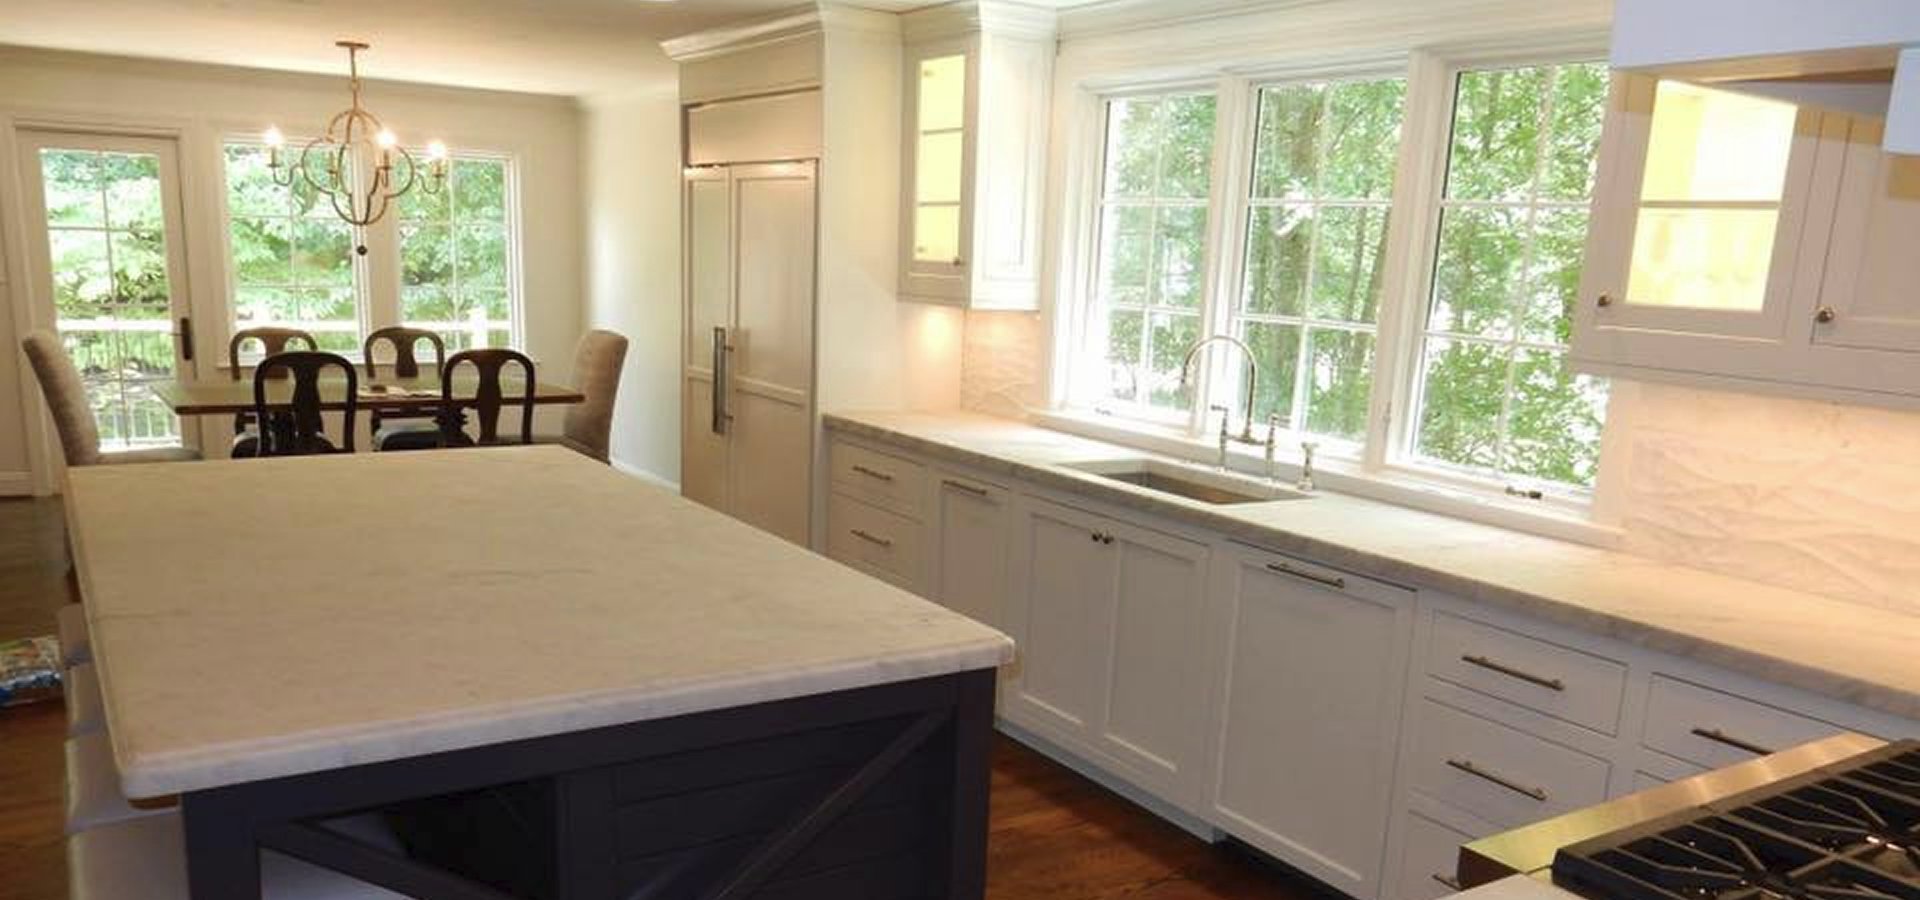 Birmingham construction and remodeling contractor